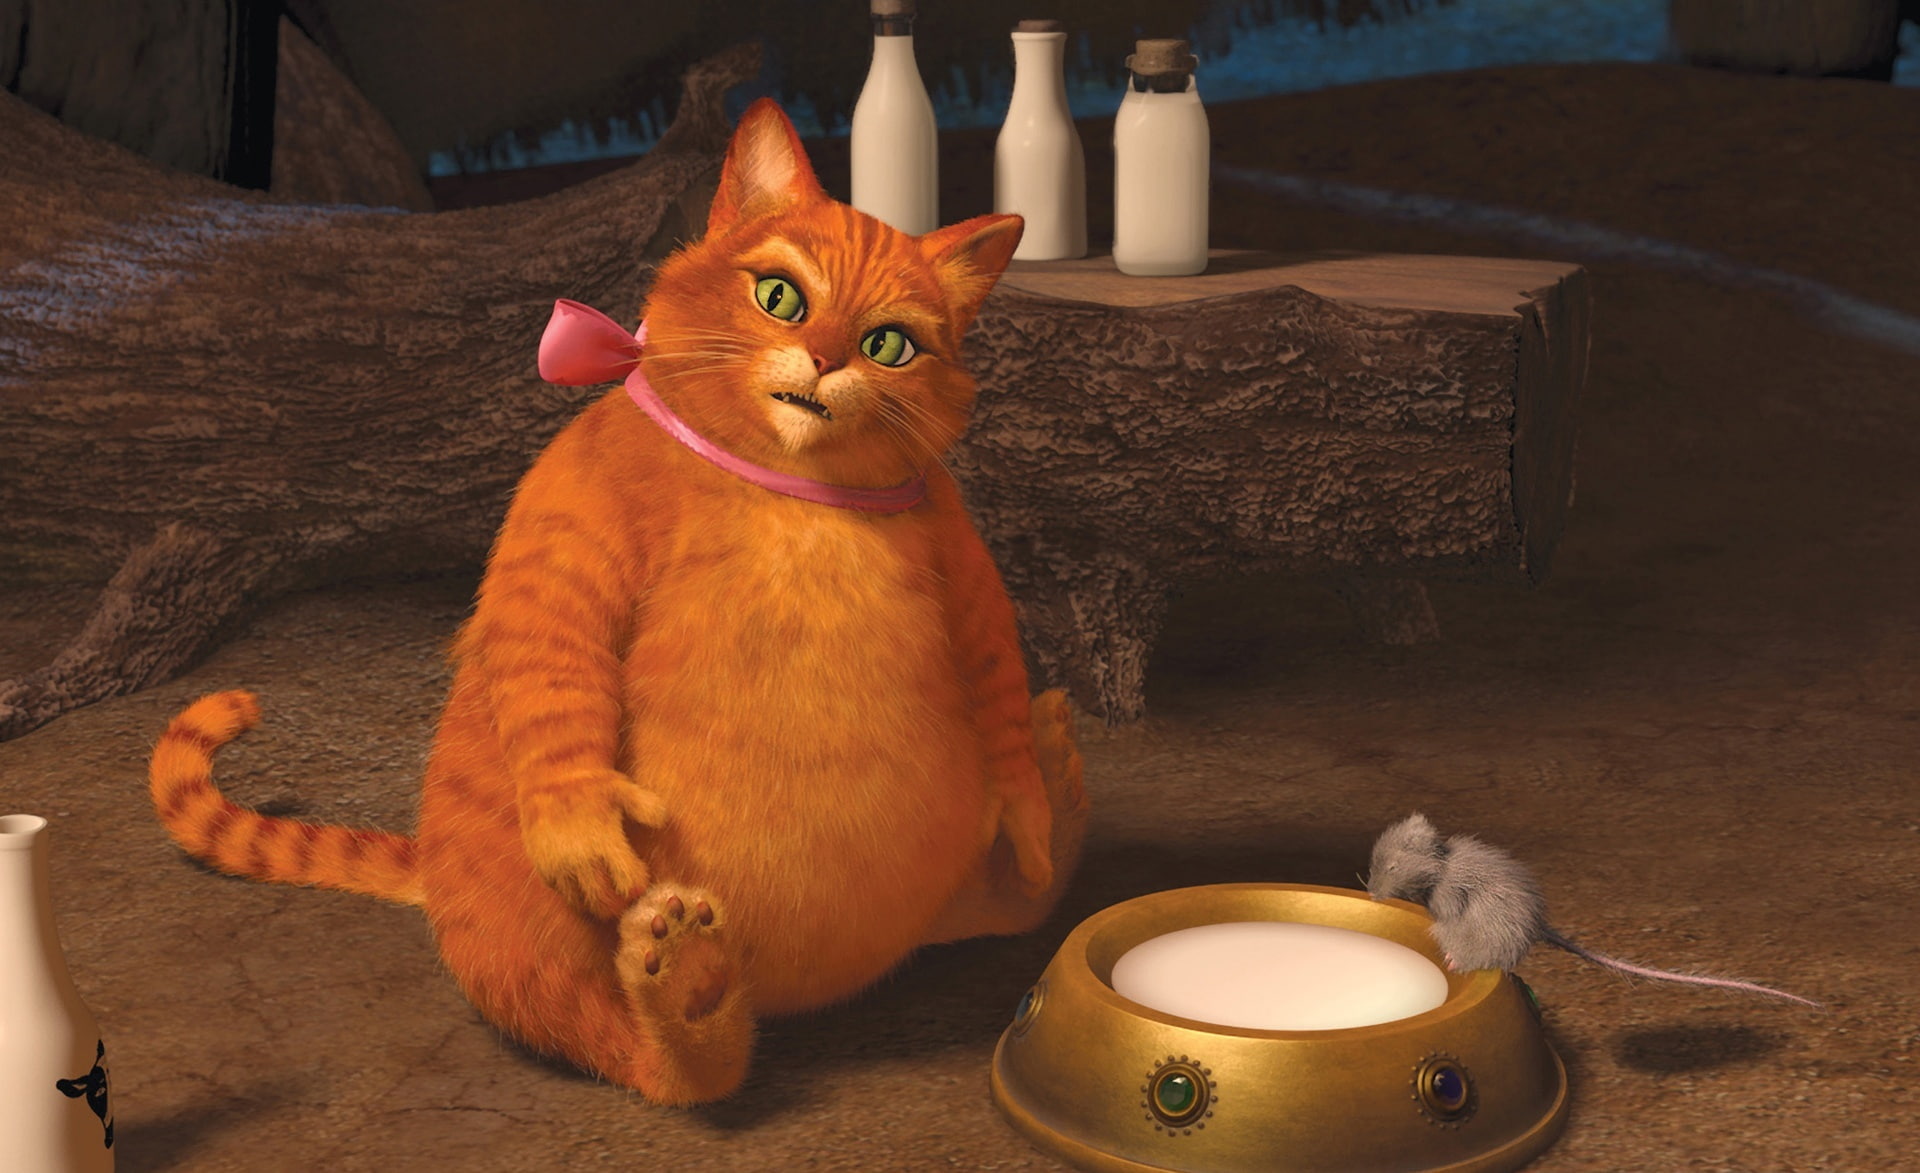 Puss in Boots, Shrek Forever After, Pussy the cat illustration